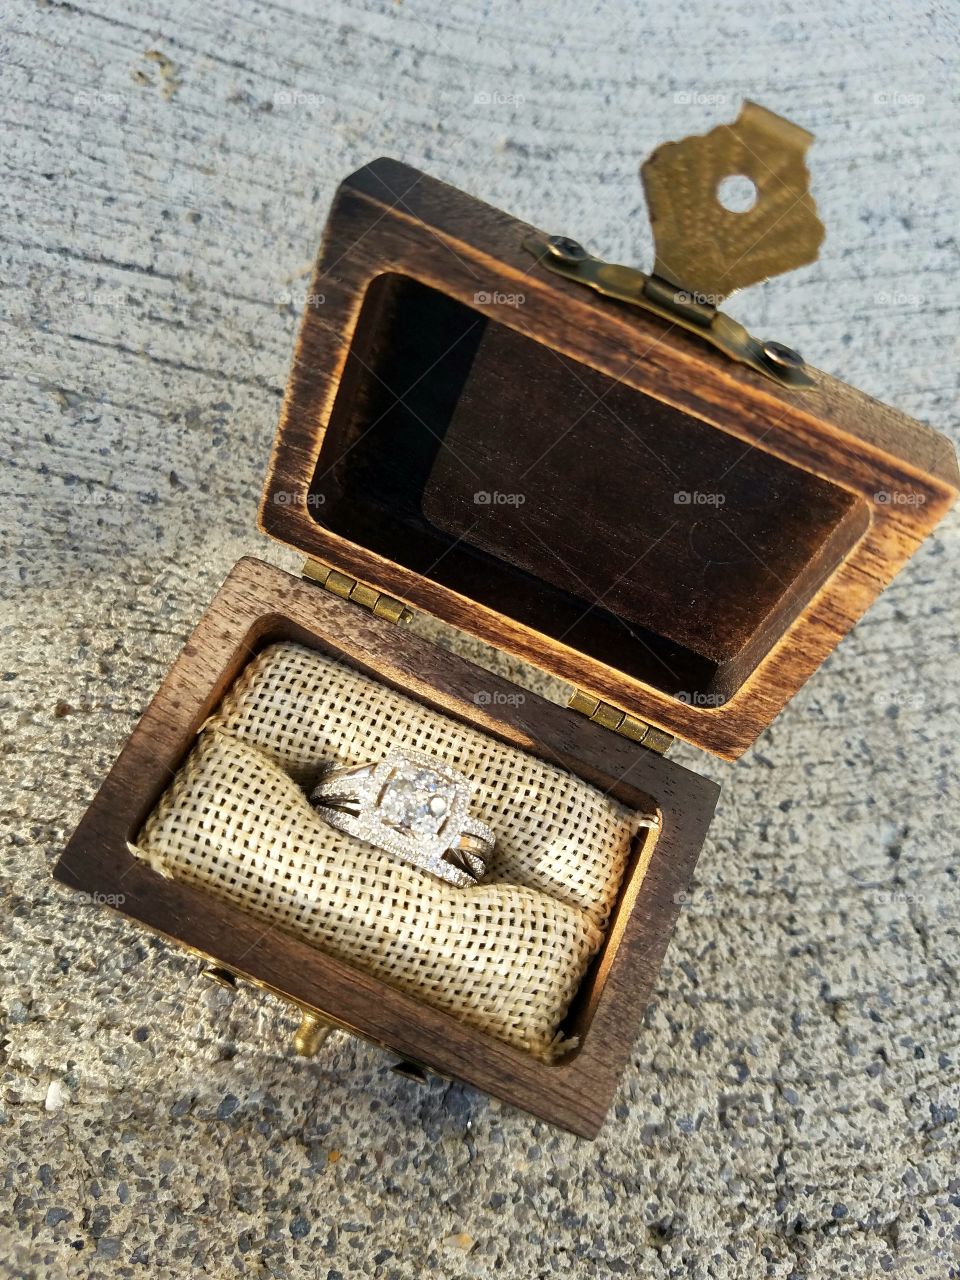 Diamond bridal ring set in a custom wood box from LuxWoods